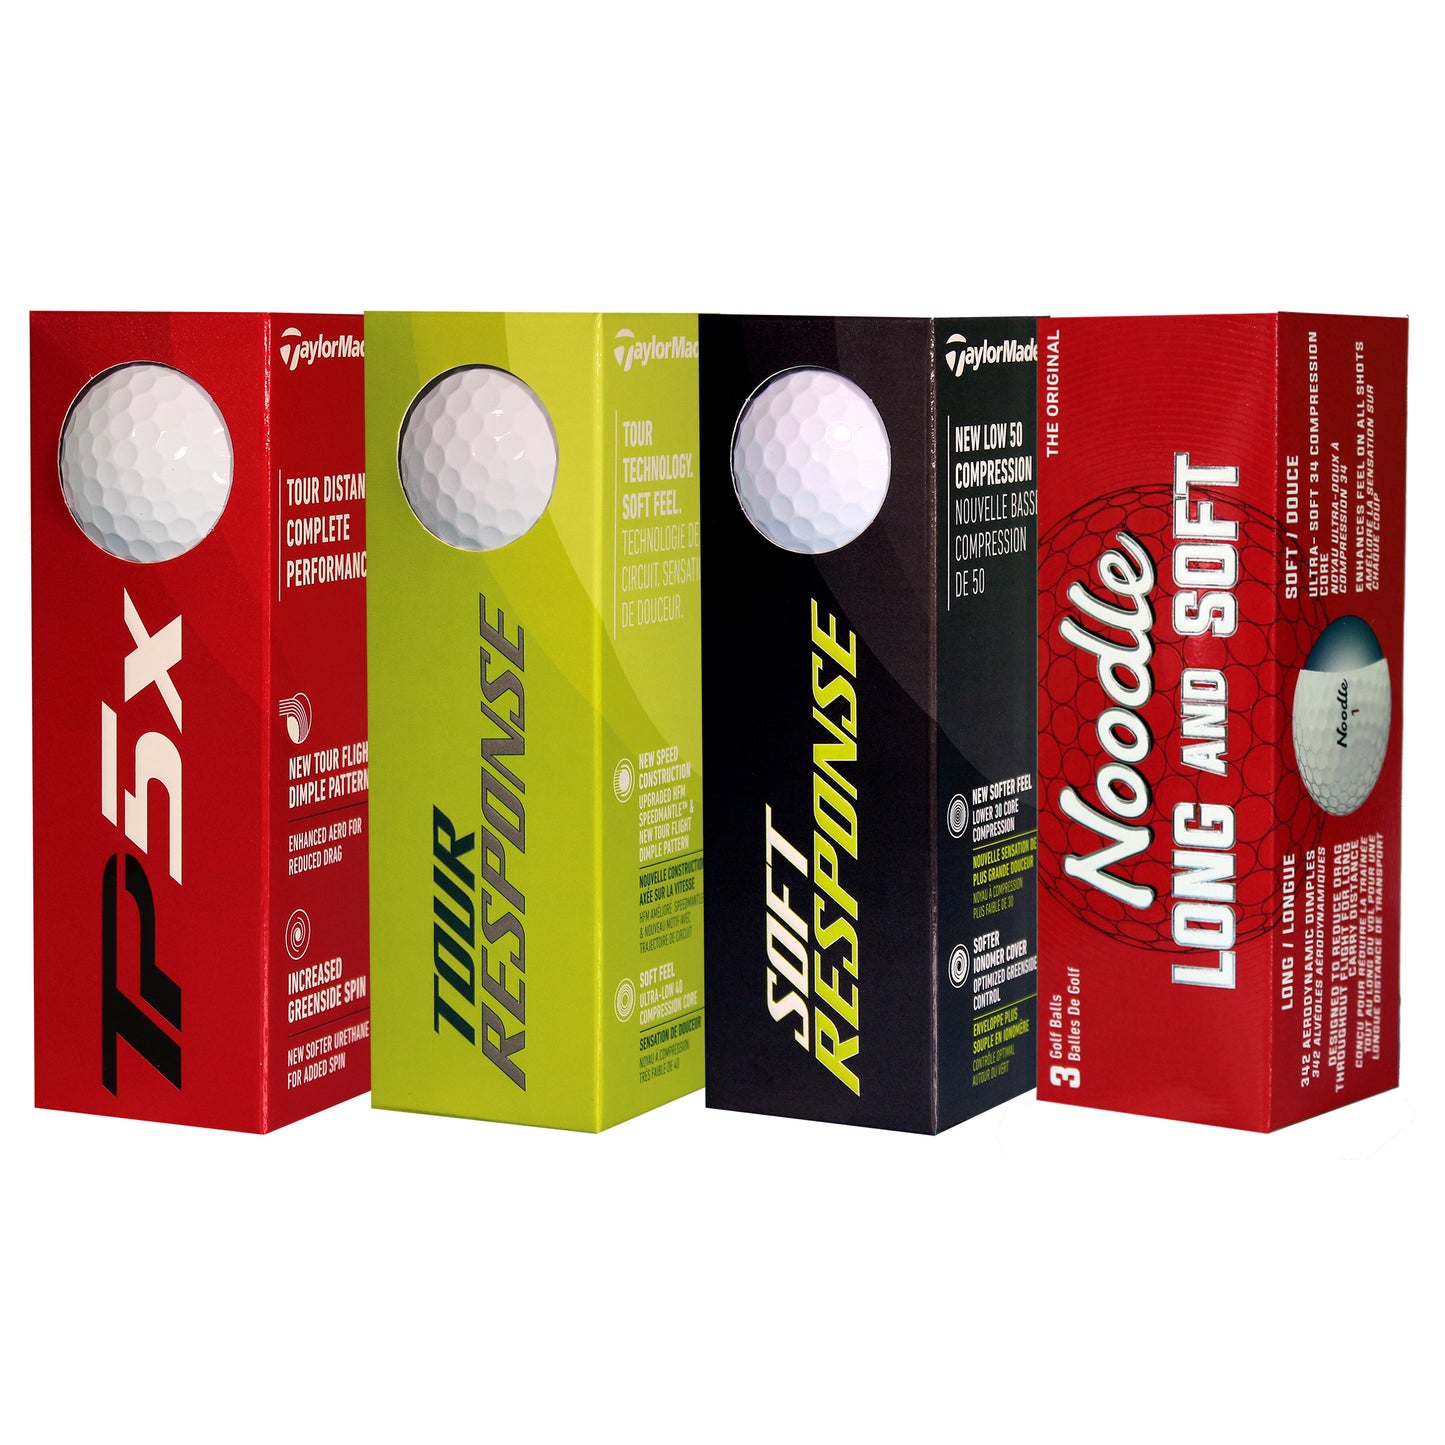 TaylorMade Variety Pack - All Levels